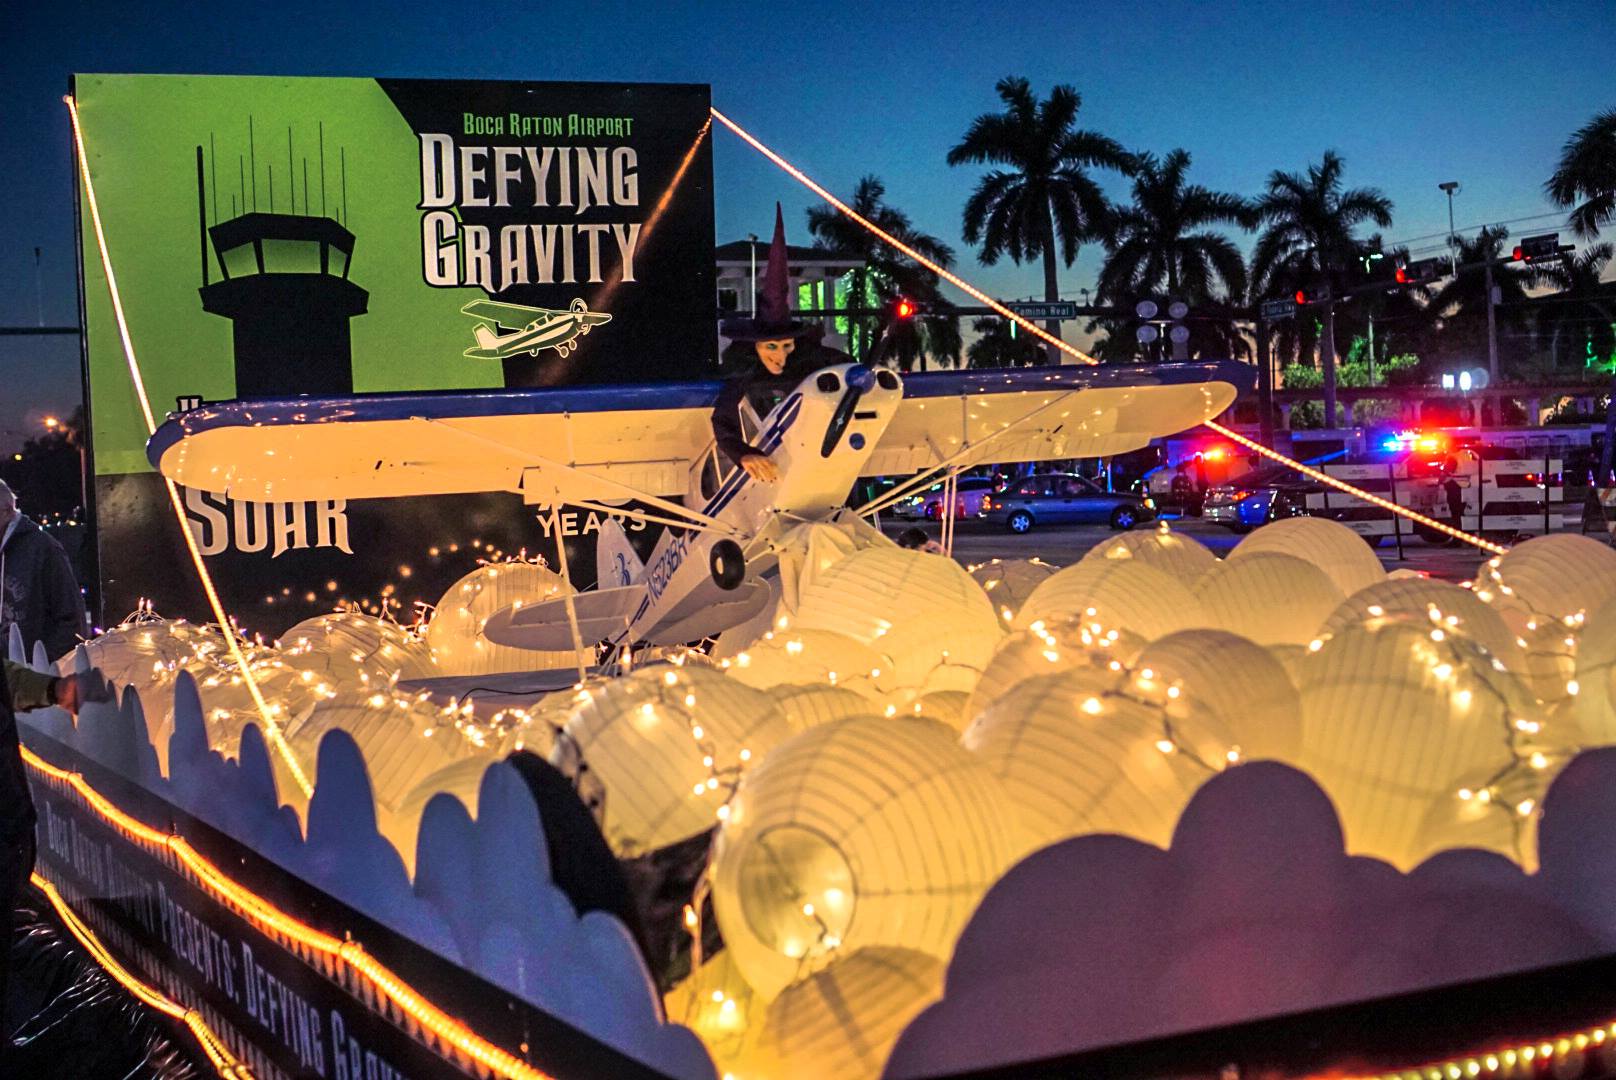 Boca Raton Holiday Parade BRAA float Defying Gravity shows witch on top of Cessna 172